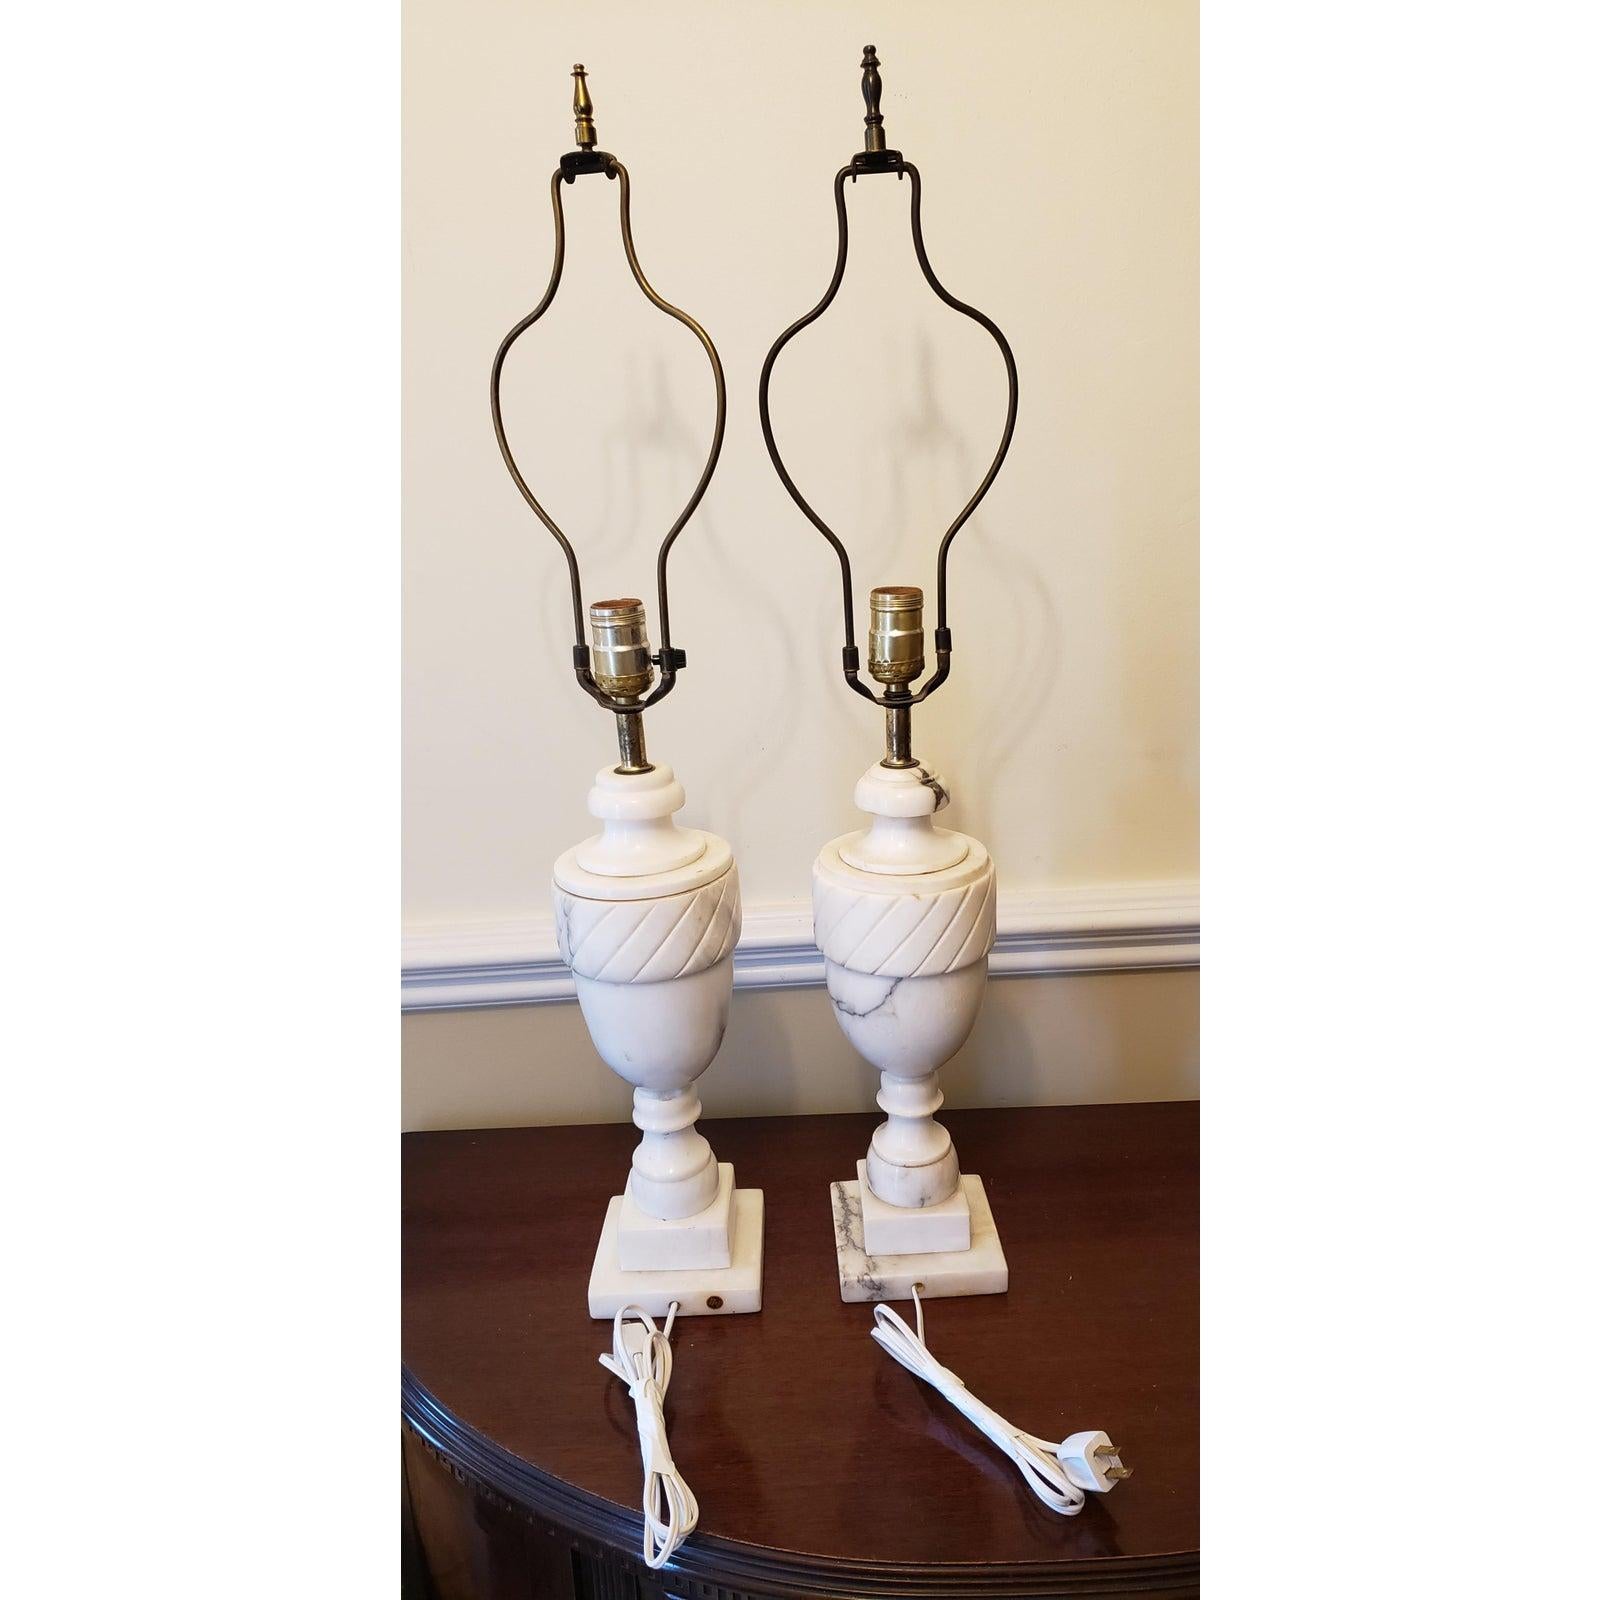 Pair of Italian vintage Carrara marble table lamps. The lamps are 30